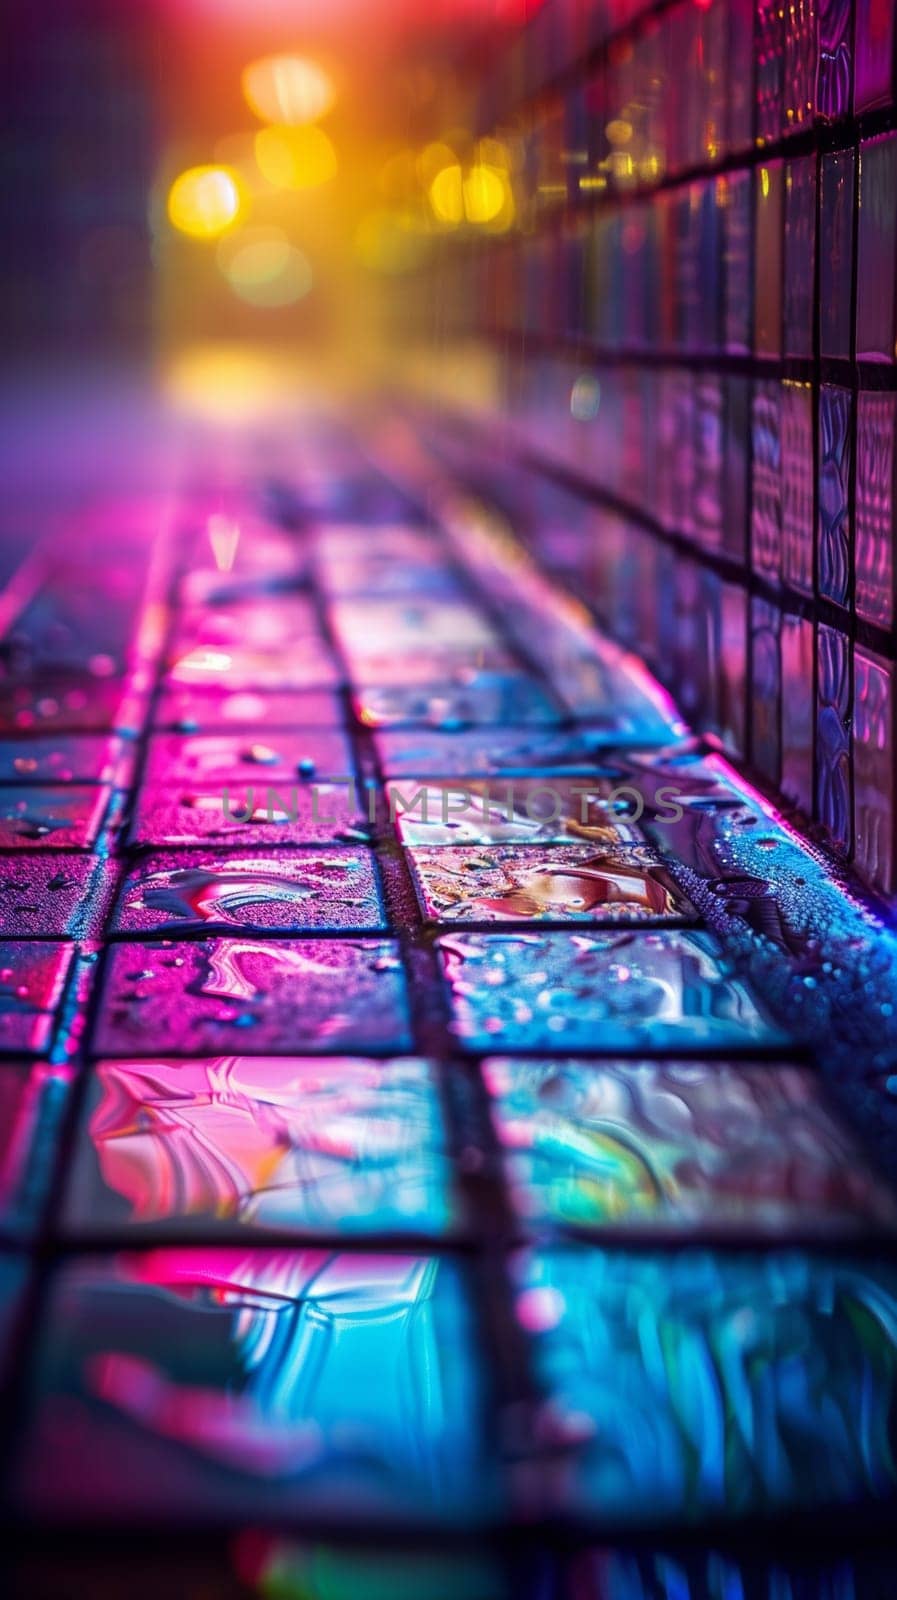 A close up of a colorful tile floor with some lights